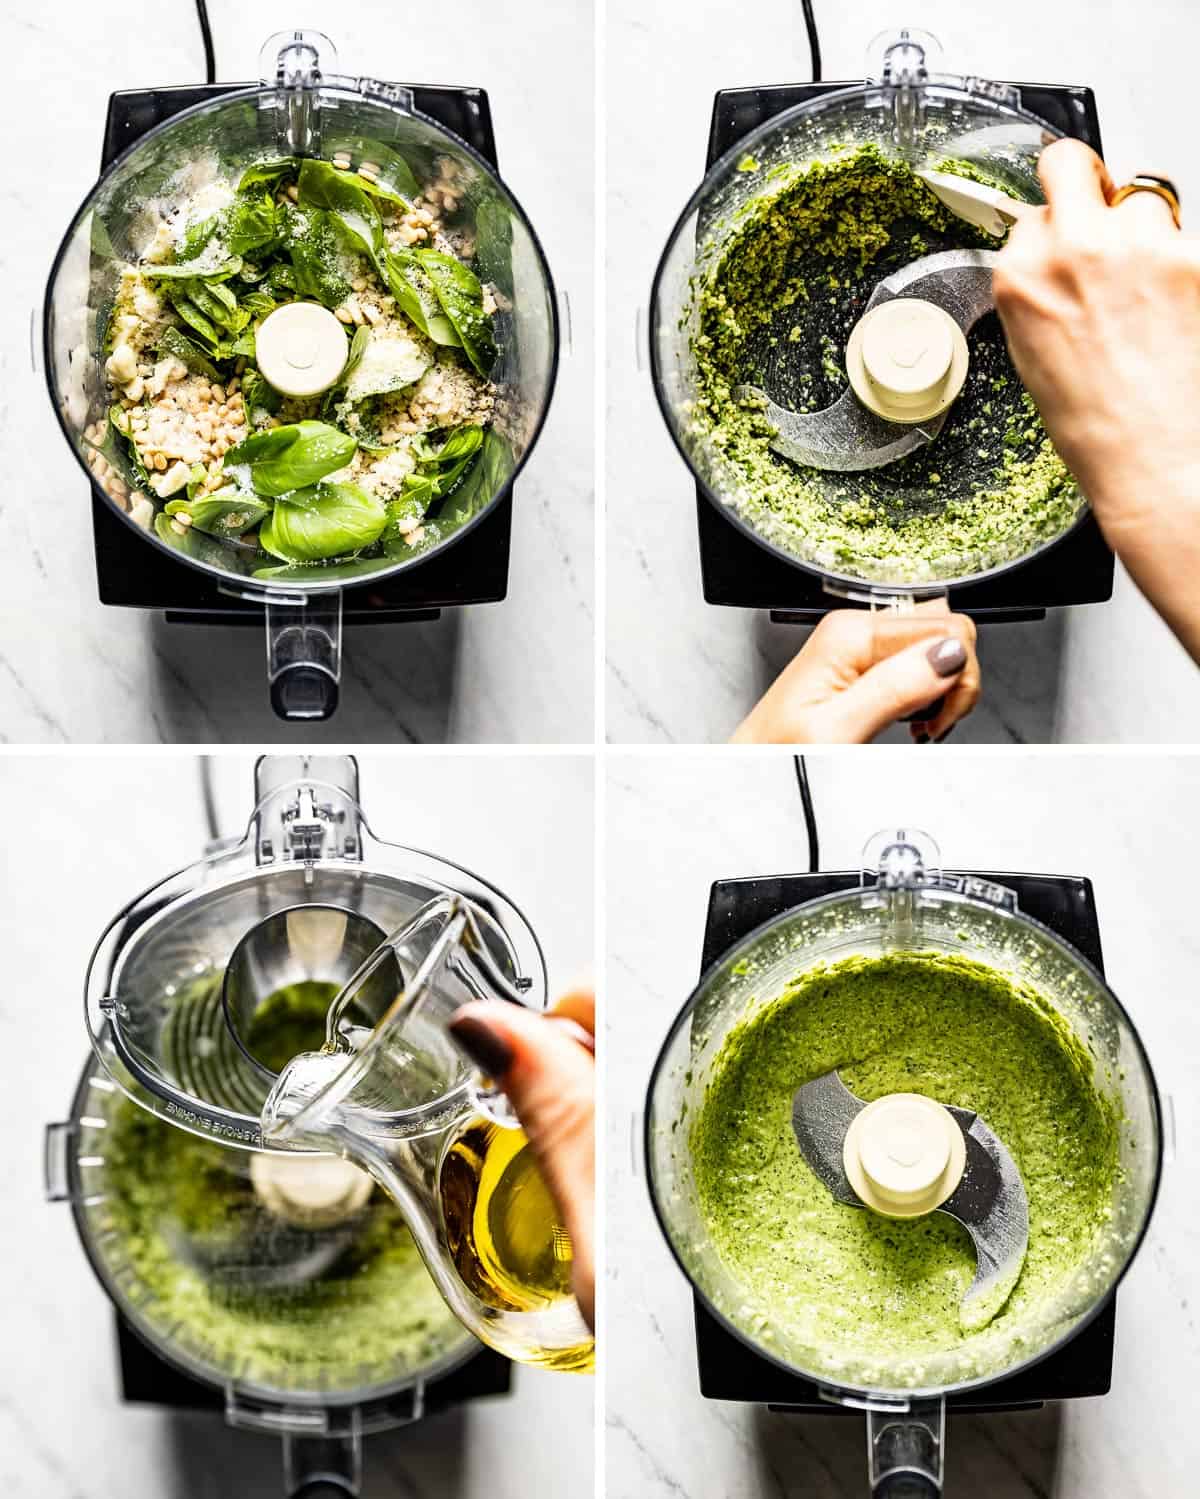 a collage of images showing how to make the pesto salad dressing